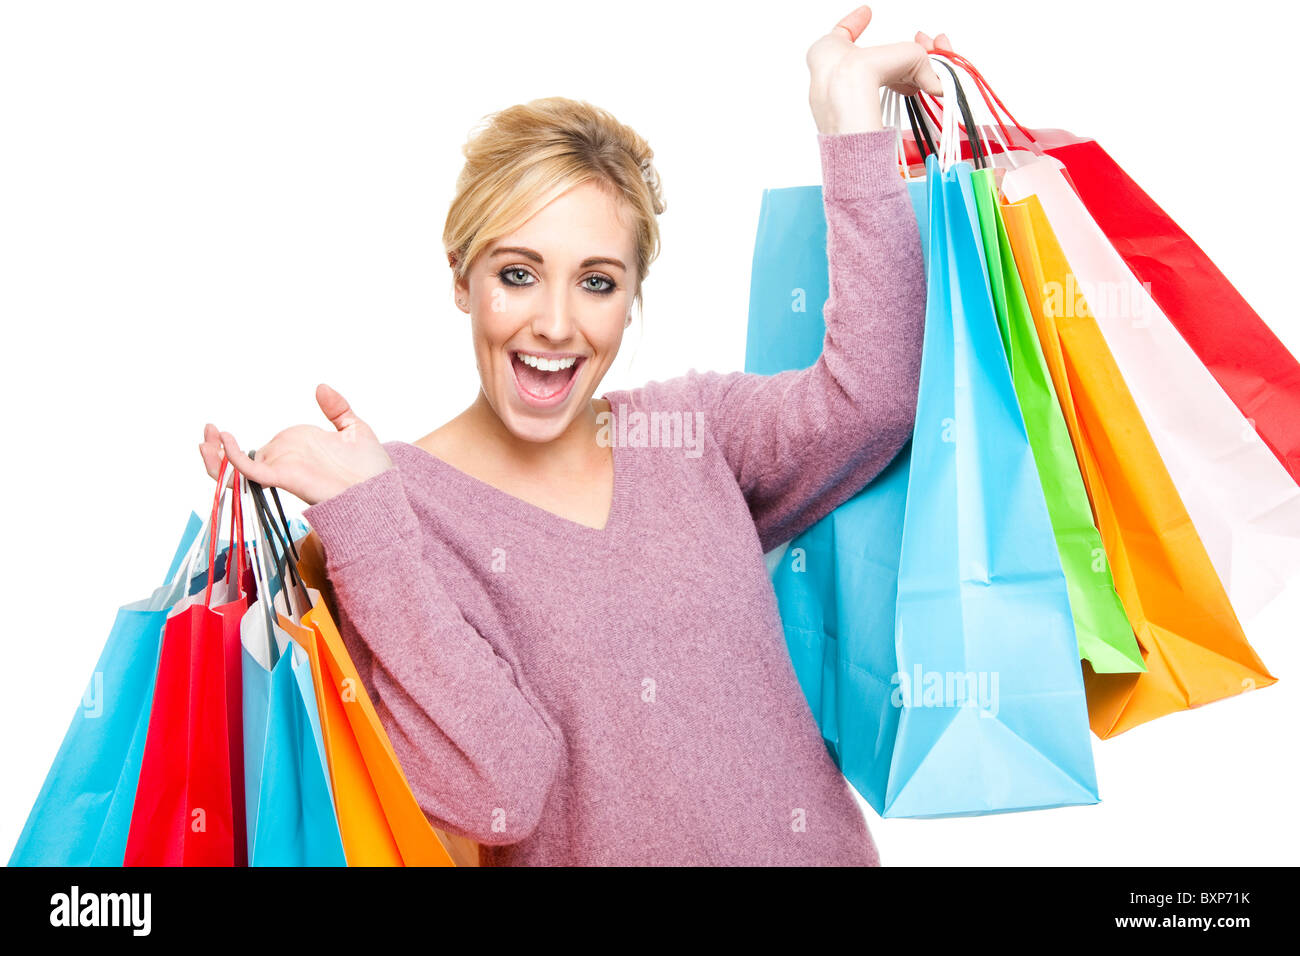 Attractive Young Blond Woman Carrying Lots of Multi-Colored Shopping Bags  Looking Happy and Excited Stock Photo - Alamy